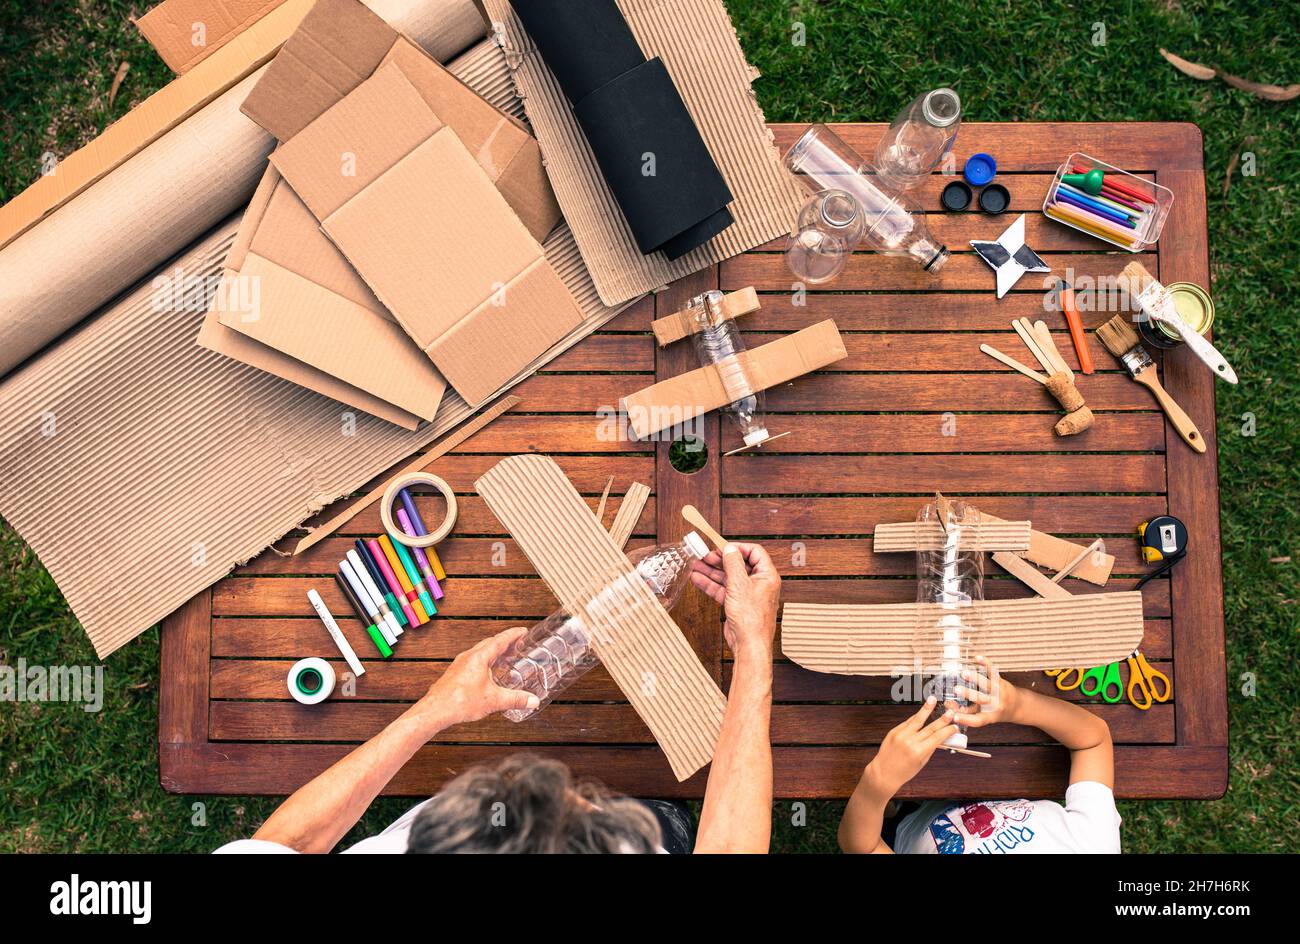 grandfather and grandson building airplanes with recycled material (cardboard, PVC bottles, wood). work ideas circular economy, recycling, environment Stock Photo